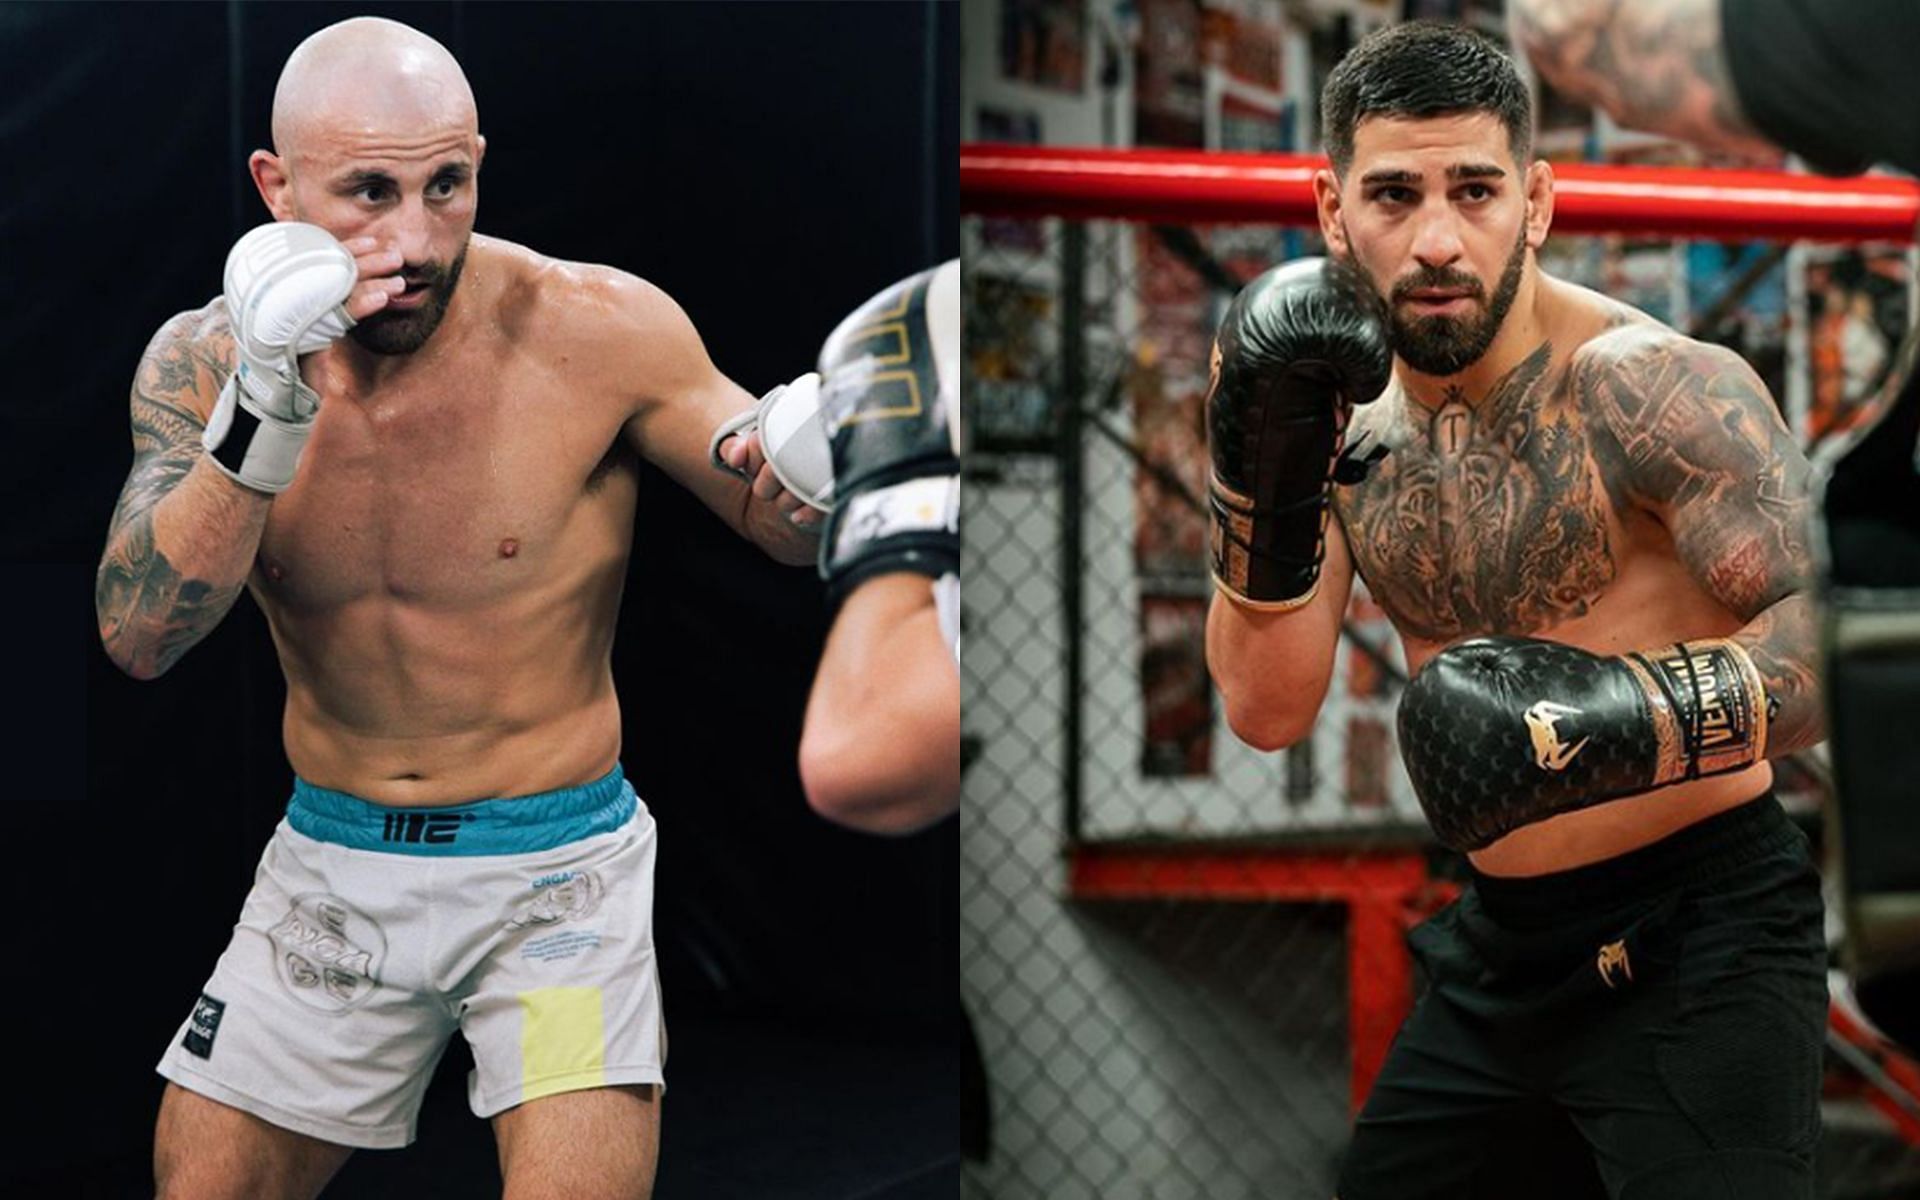 Alexander Volkanovski (left) is gearing up for a legacy-defining title fight against Ilia Topuria (right) [Images Courtesy: @alexvolkanovski and @iliatopuria Instagram]